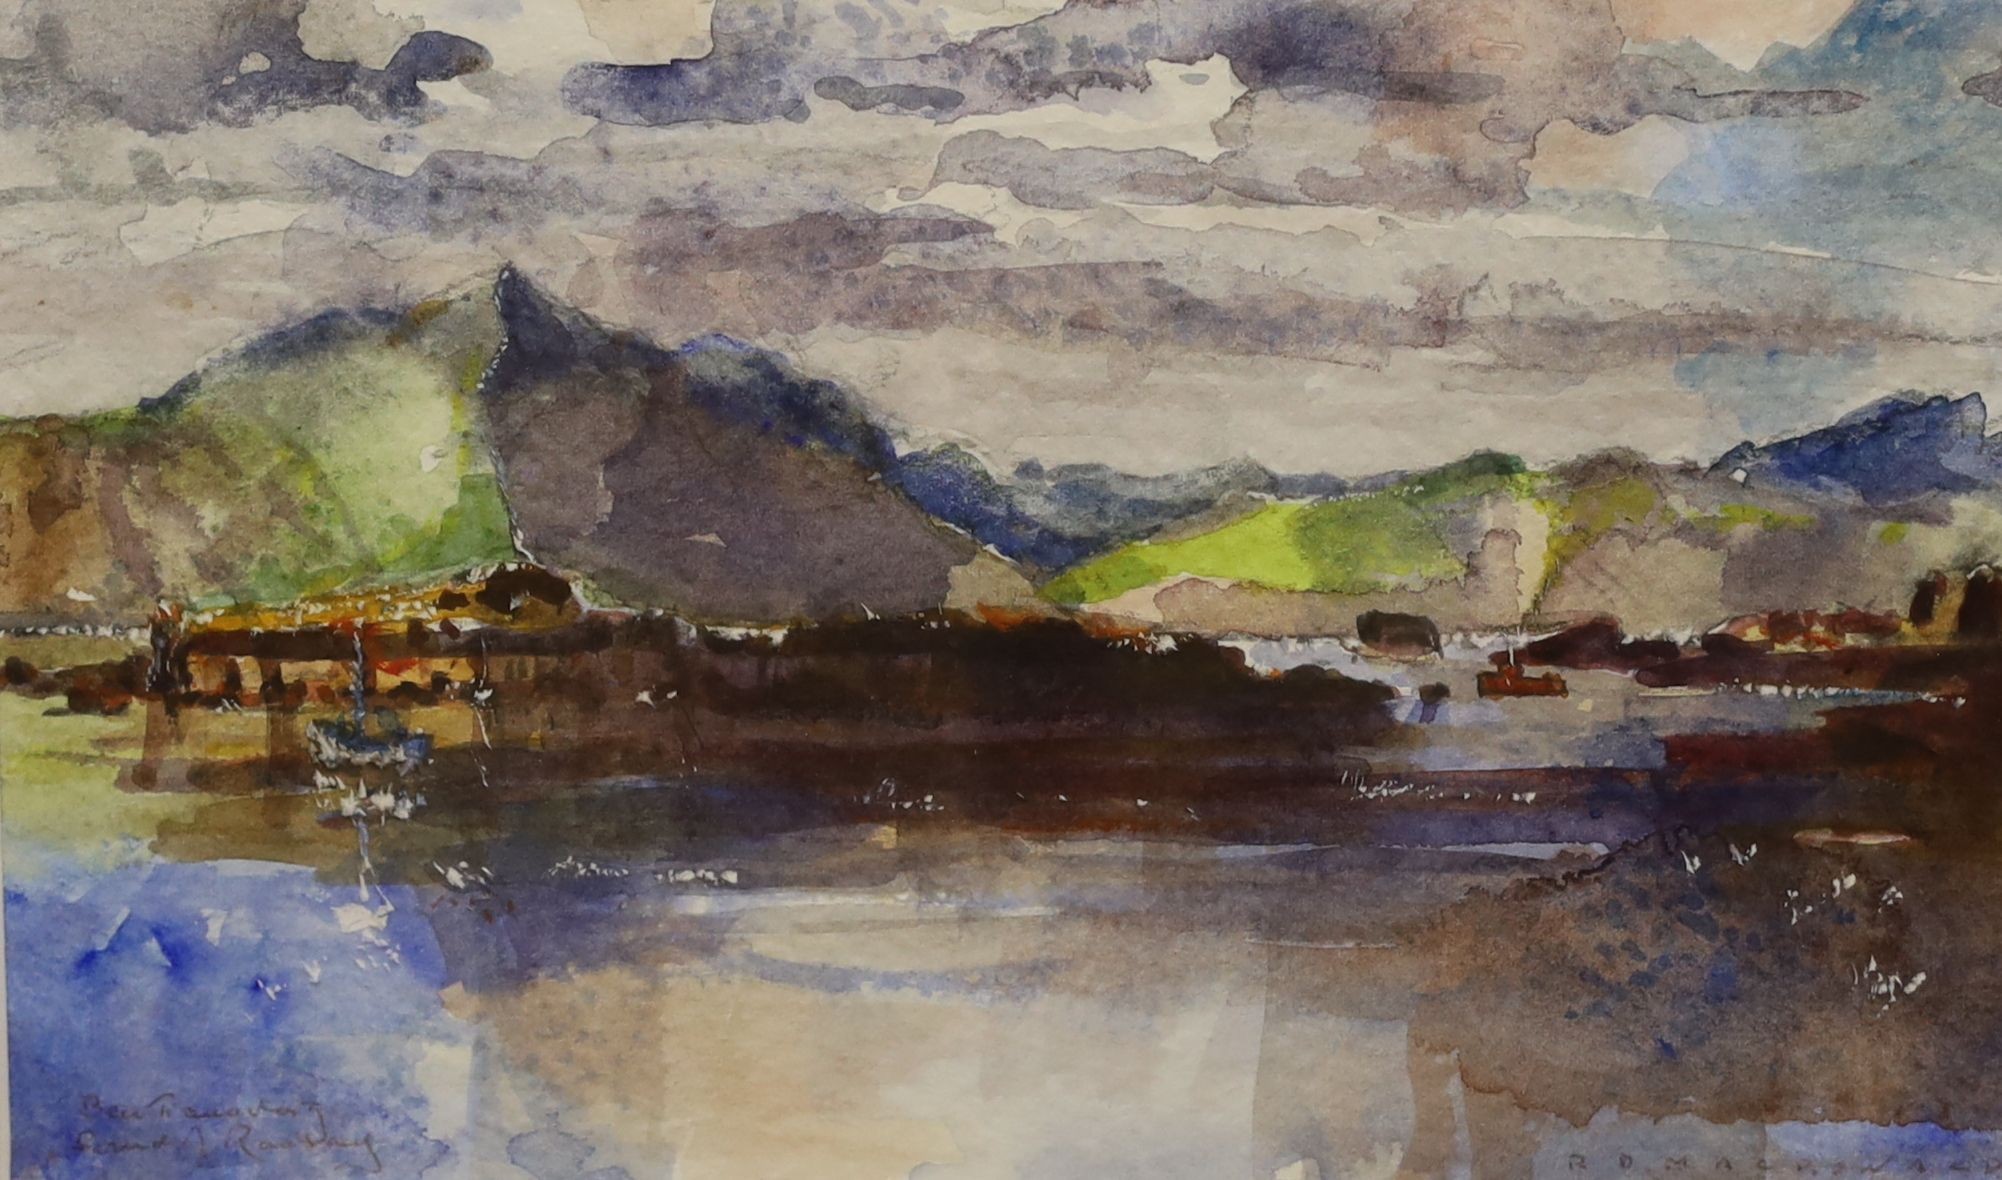 Sir Roderick Macdonald (1921-2001), watercolour, 'Ben Tianavaig and Sound of Raasay, Skye', signed and titled, 15 x 24cm